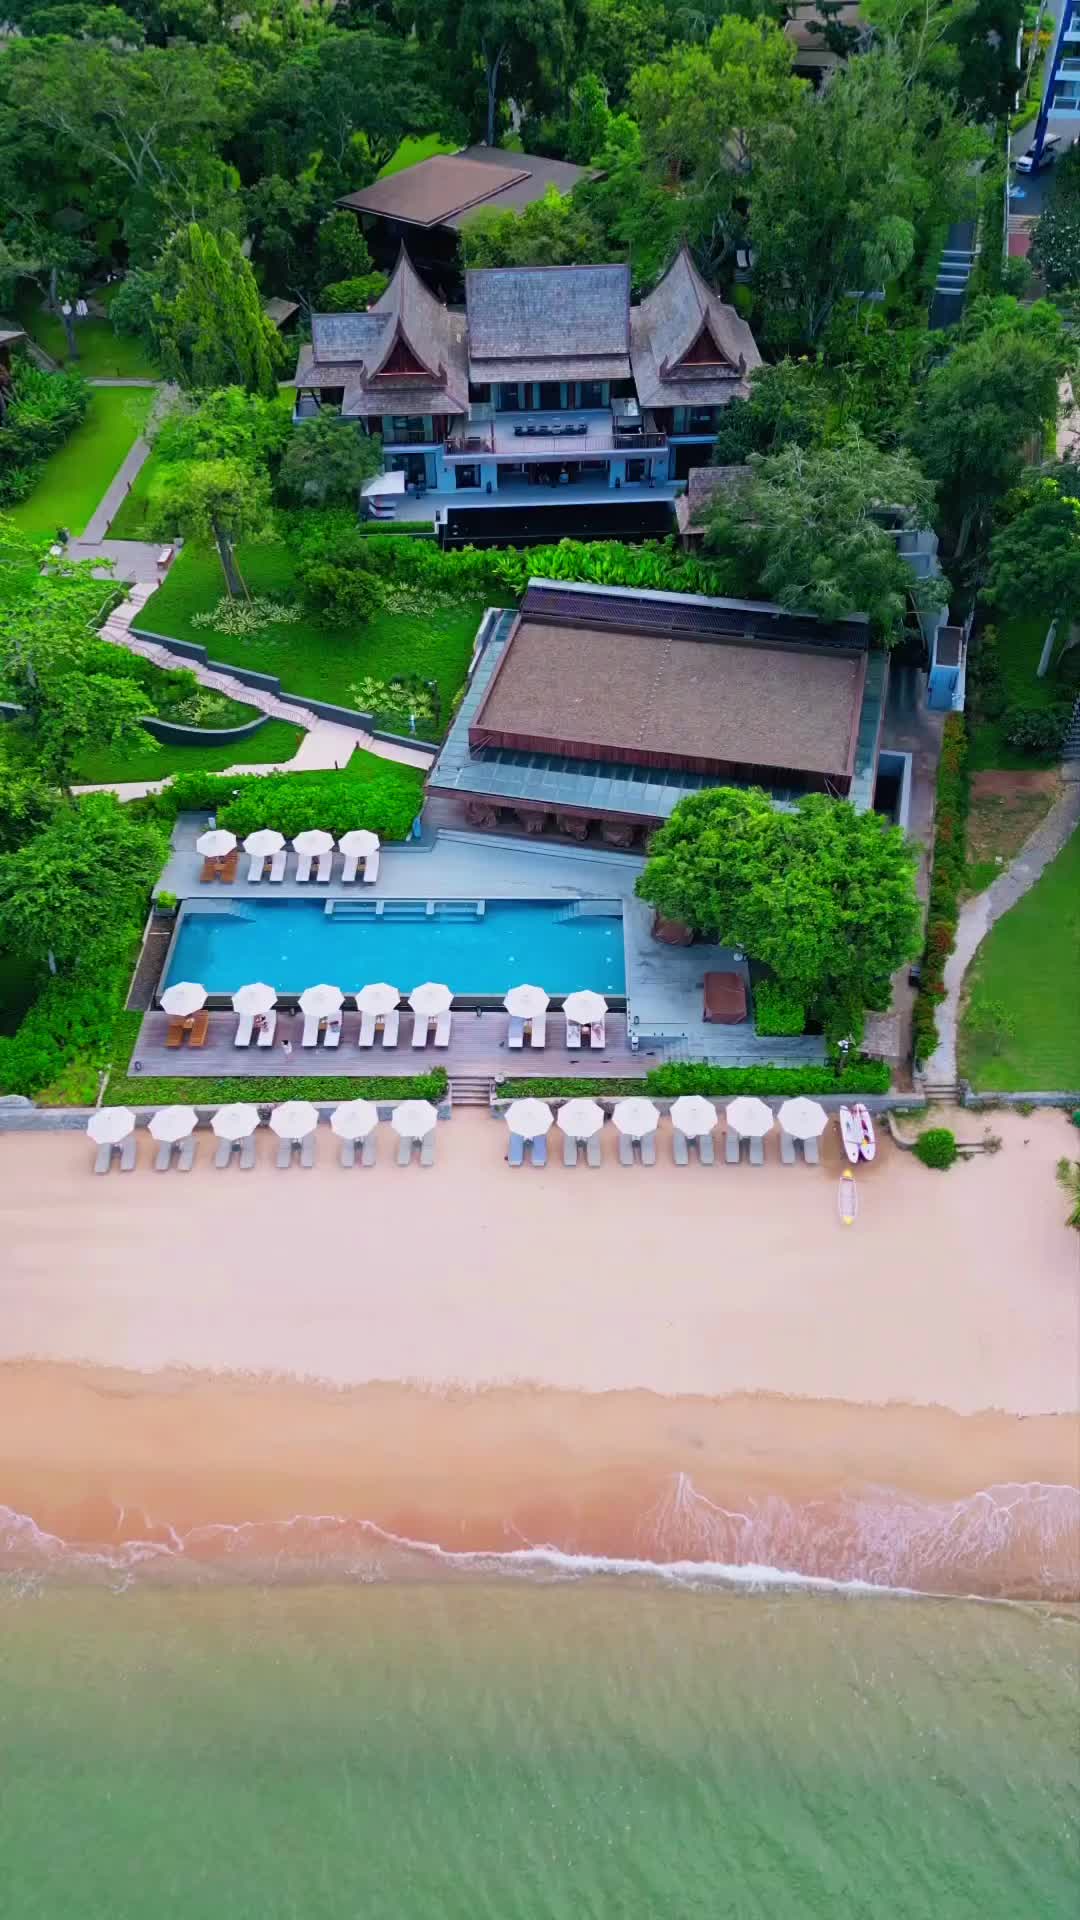 Get a taste of serene luxury at @andazpattayajomtienbeach. ☀️🏖️

Once you arrive at Andaz Pattaya Jomtien Beach, you’ll feel like you’re on vacation. This luxury lifestyle resort provides a myriad of ways for you to express your personal style and connect with the local culture and nature, from destination excursions to authentic dining, wellness and family activities. This tropical paradise is the perfect place to unwind, relax and enjoy the simple things in life. Let them help you make the most of your next holiday!

📍 @andazpattayajomtienbeach
​#andazpattaya #andazpattayajomtienbeach #andazpattayamoments
.
.
.
.
.
.
.
.
#thailandinstagram #lovethailand #lostinthailand #paradisebeach  #thailandonly  #thailandinstagram #thailand_allshots #igthailand #travelthailand #thailand🇹🇭 #beautifulthailand #lostinthailand #thailandtravel #amazingthailand #adayinthailand #thaistagram #thailandonly #beachlover #beachvibes #thaibeach #beachplease #tropical #tropicalvibes #beachlife #beachtime #pattaya #pattayathailand